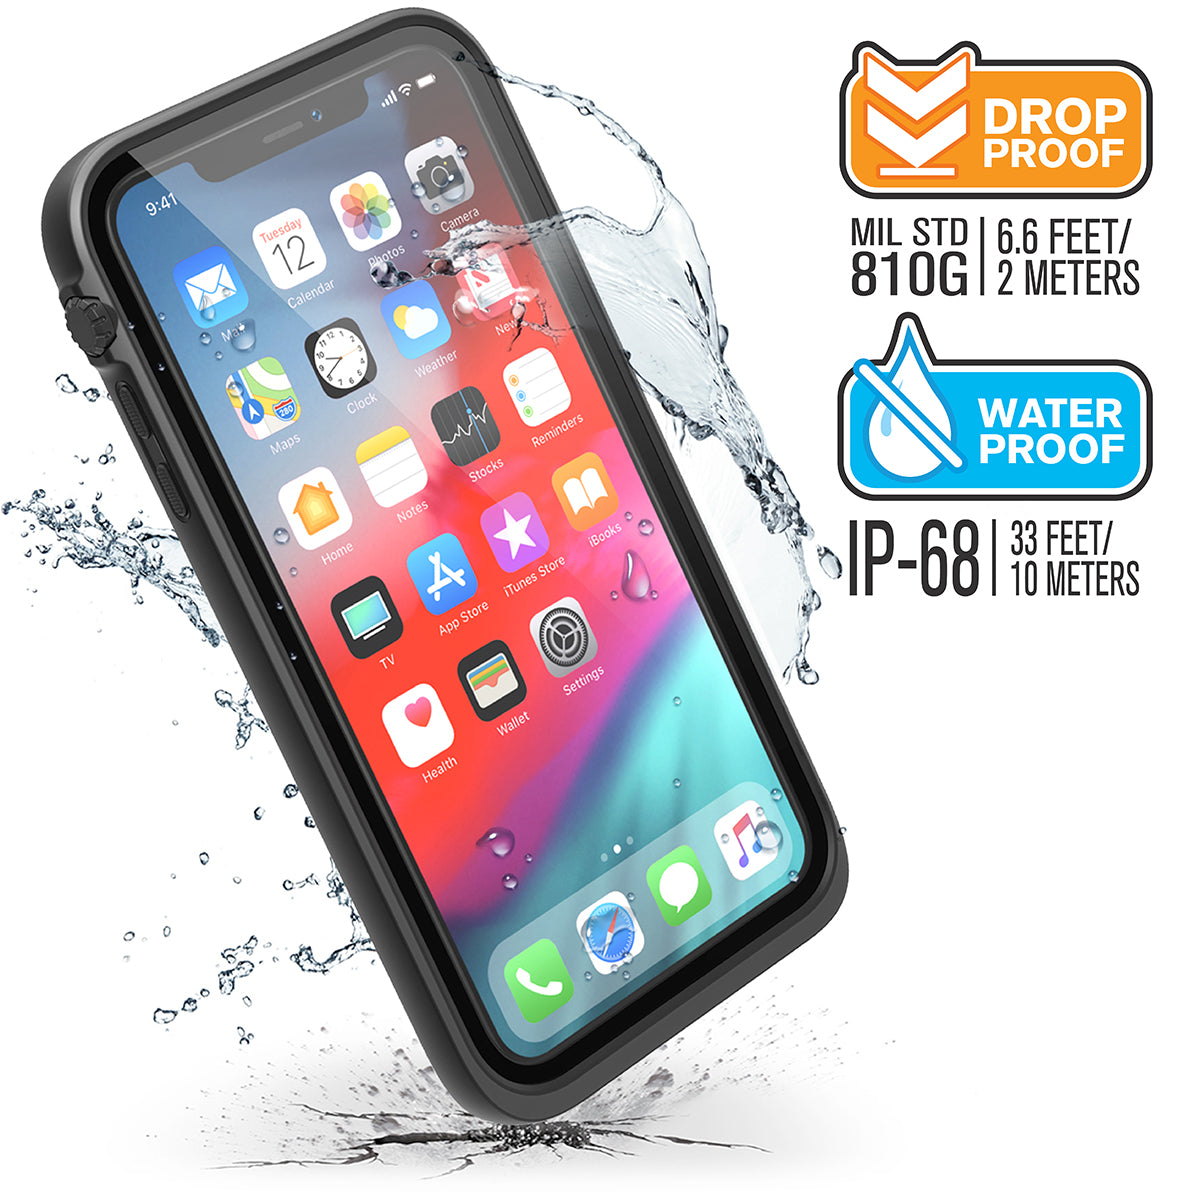 Catalyst iphone x/xr/xs/xs max waterproof case xs max showing-how-drop-proof-and-water-proof-the-case-is-in stealth-black black text reads drop proof MIL STD 810G 6.6 FEET 2 METERS WATER PROOF IP-68 33 FEET 10 METERS